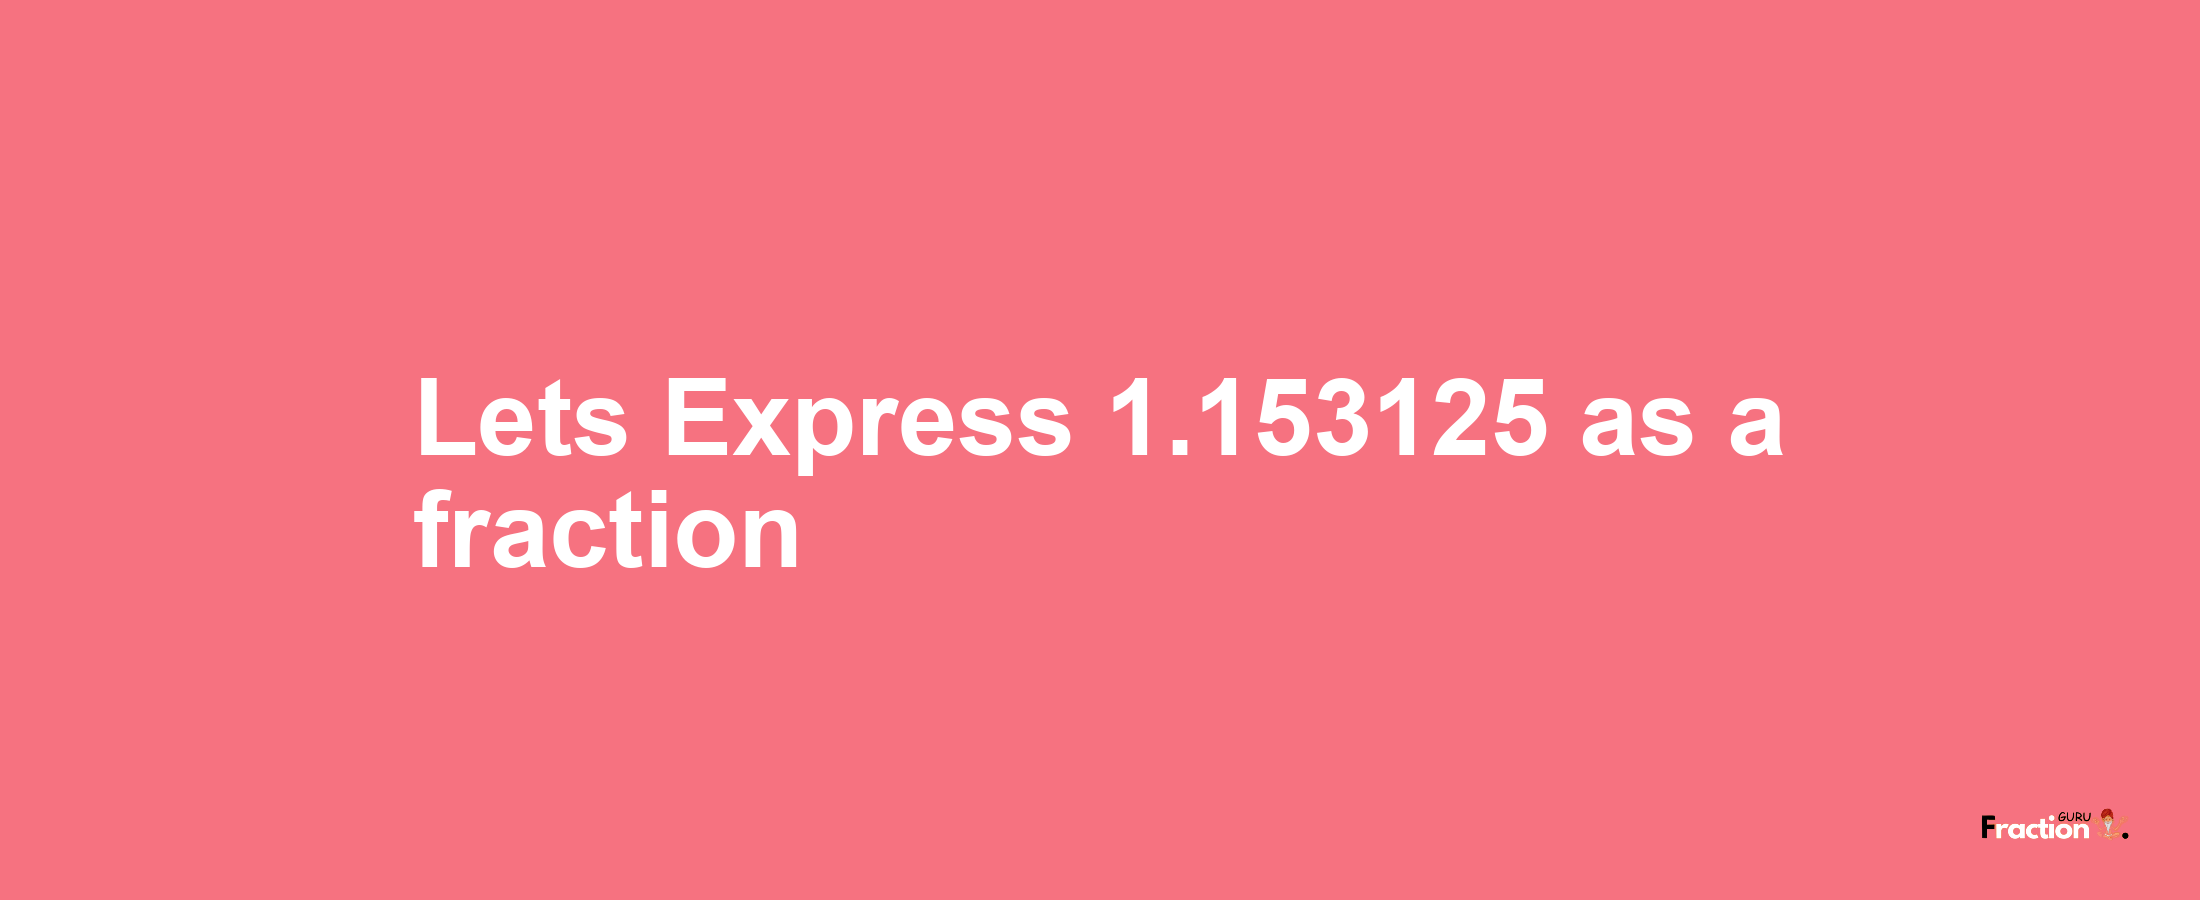 Lets Express 1.153125 as afraction